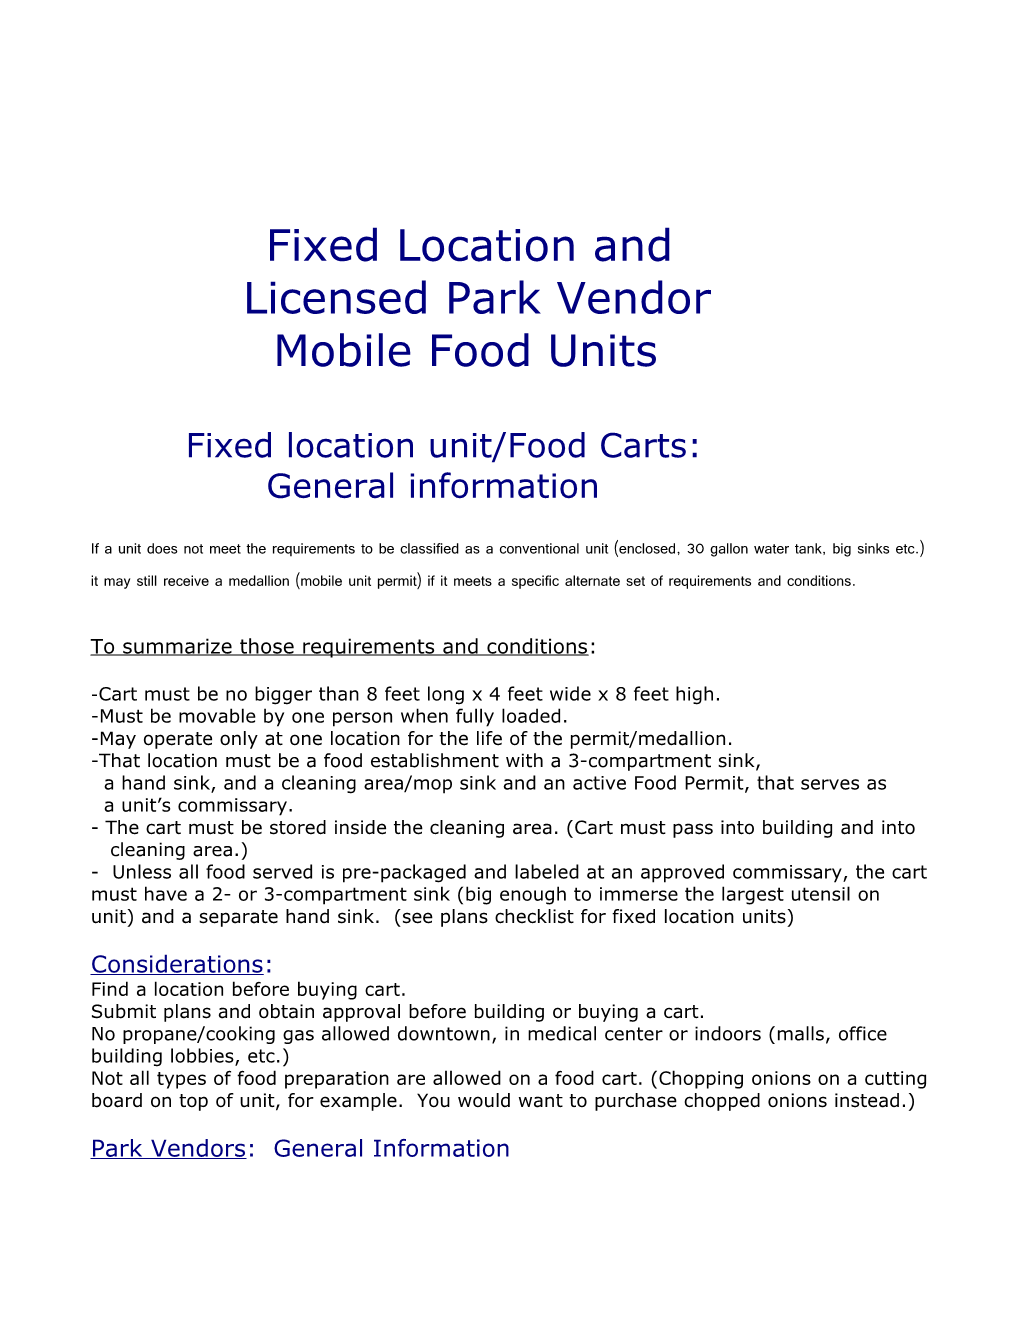 INFORMATION PACKAGE for FIXED LOCATION and LICENSED PARK VENDOR MOBILE FOOD UNITS (Hot